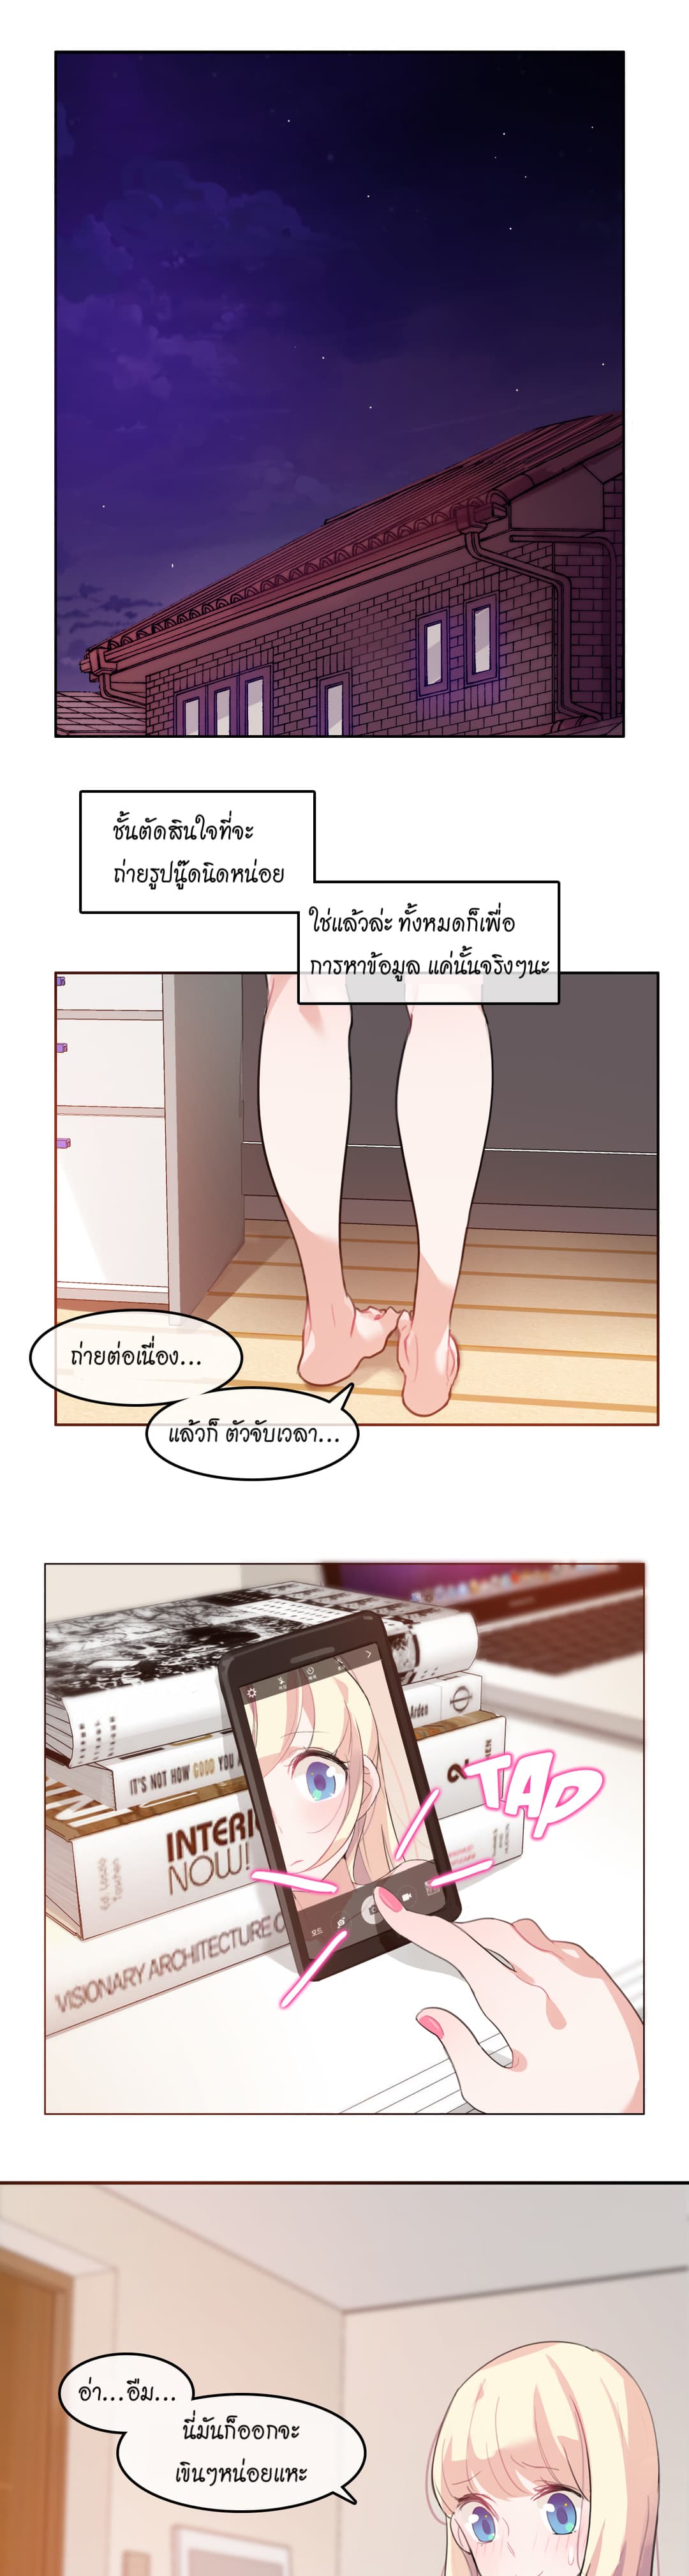 A Pervert’s Daily Life 7 (1)